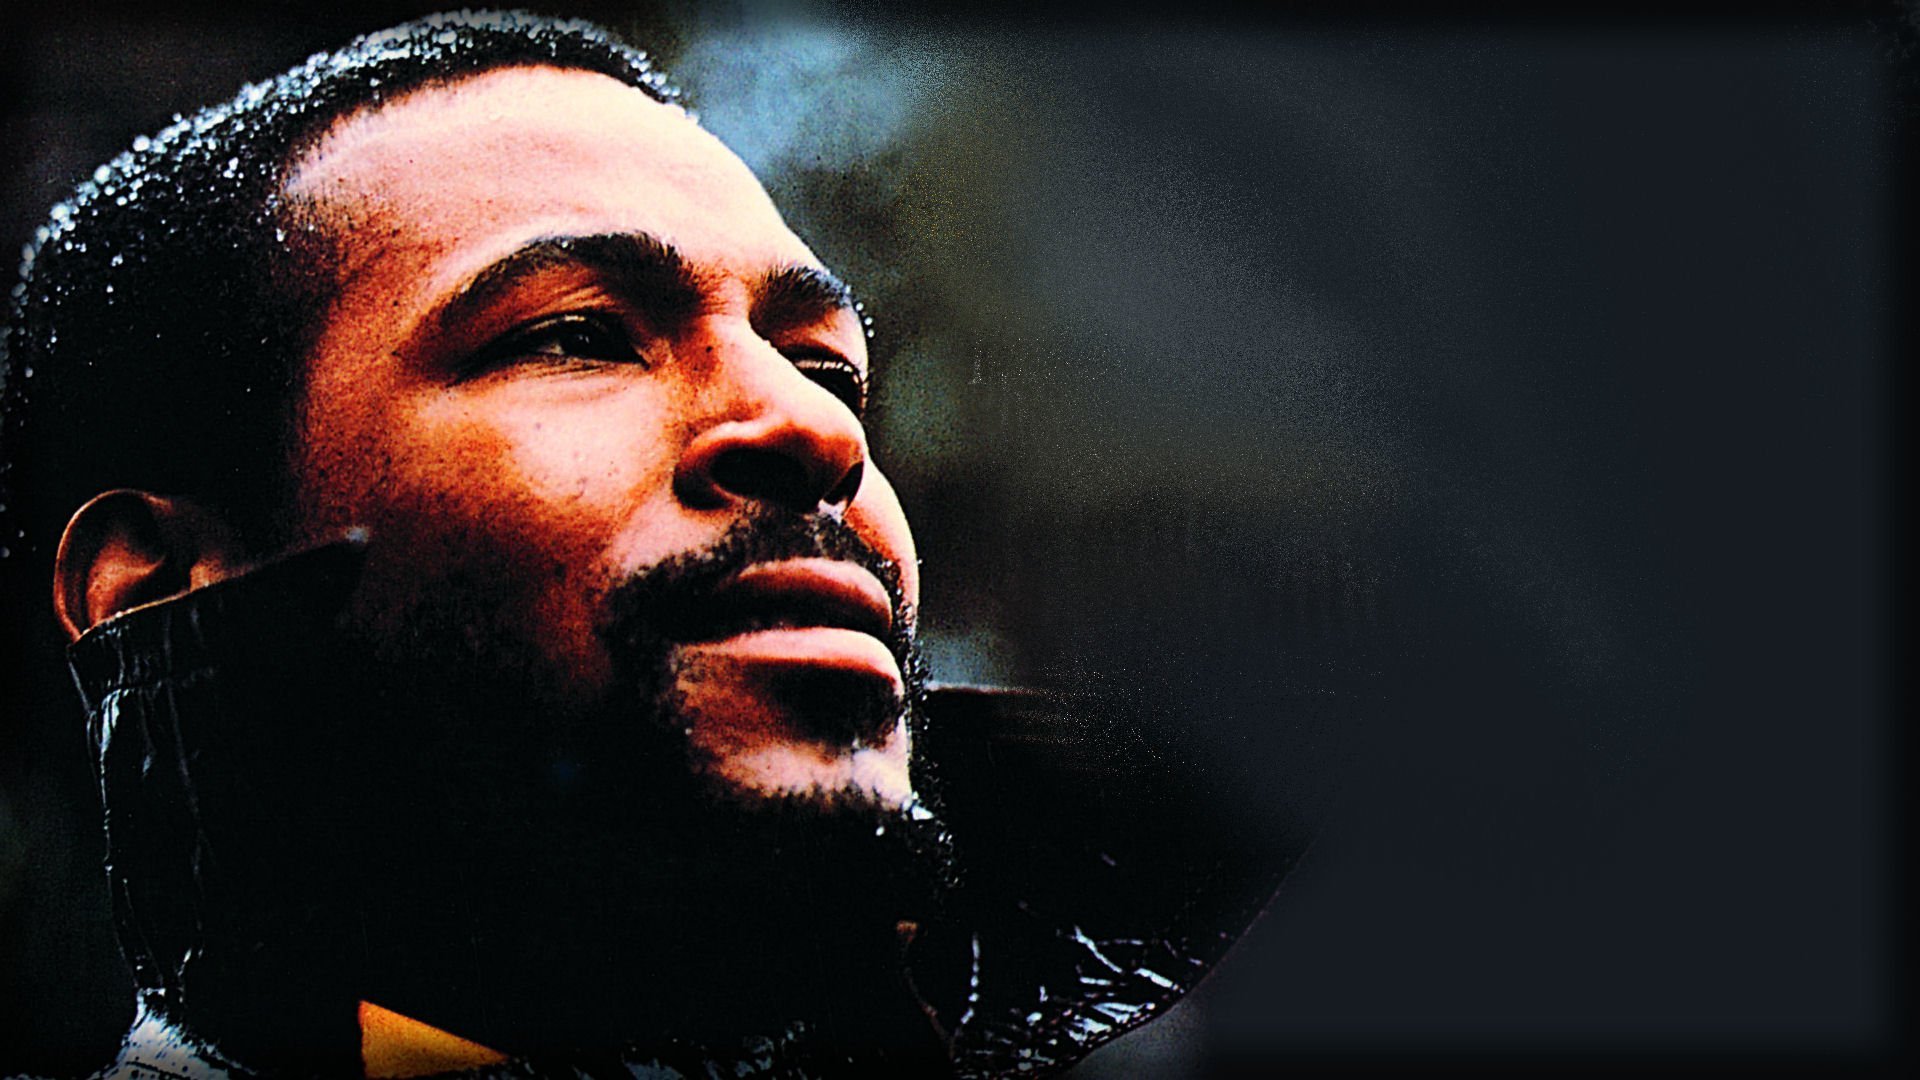 Happy Birthday to a Legend.
Forever Marvin Gaye. 